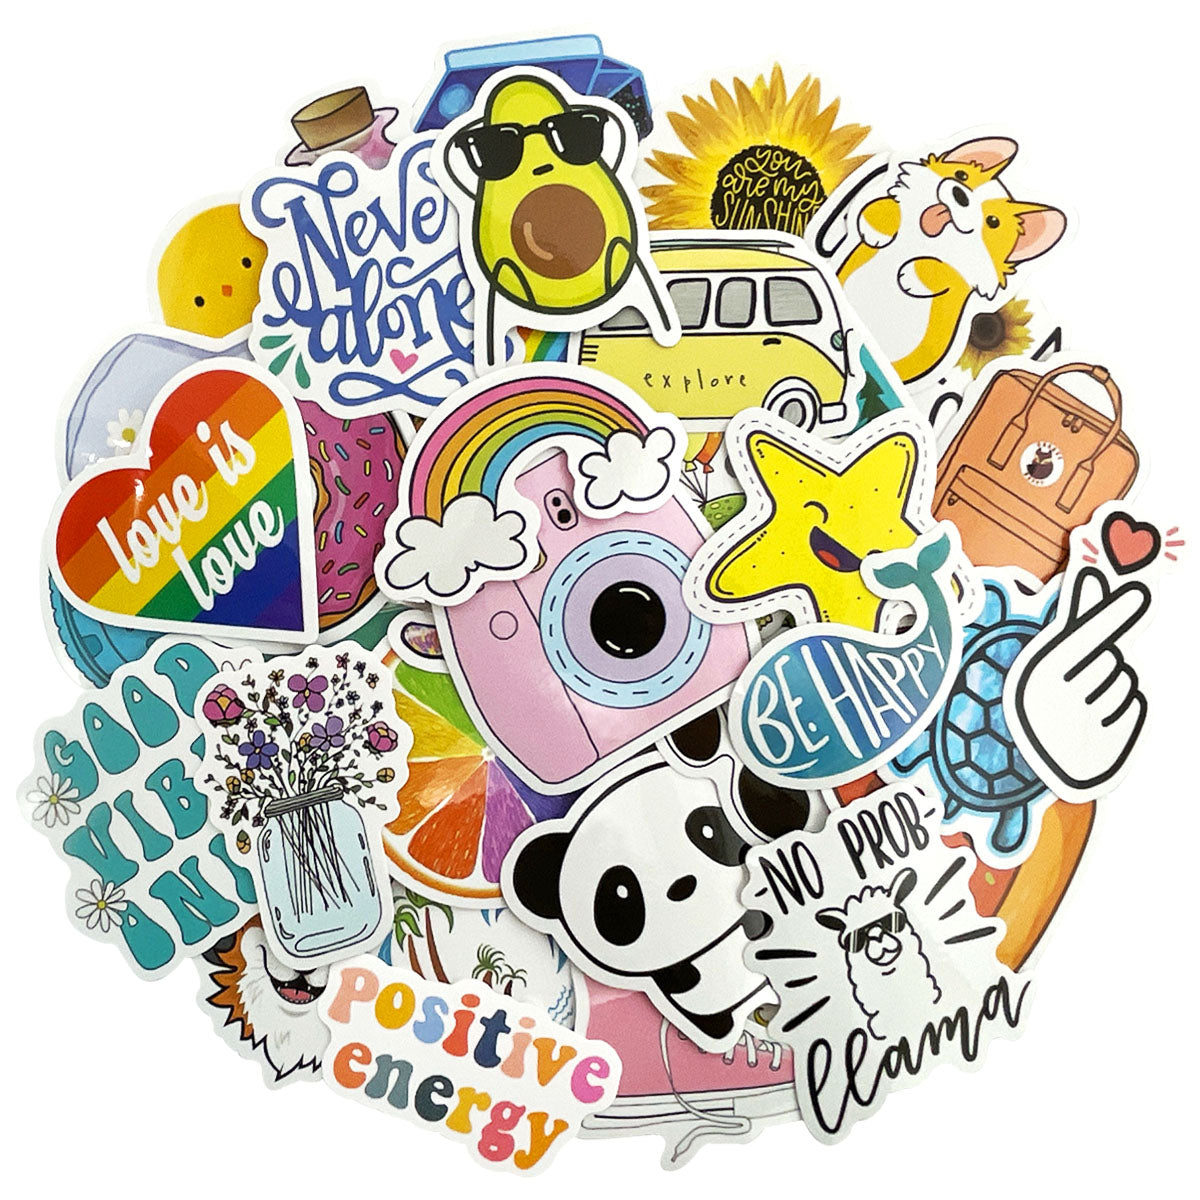 Wrapables Waterproof Vinyl Stickers for Water Bottles, Laptop, Phones,  Skateboards, Decals for Teens, 100pcs, Vintage 